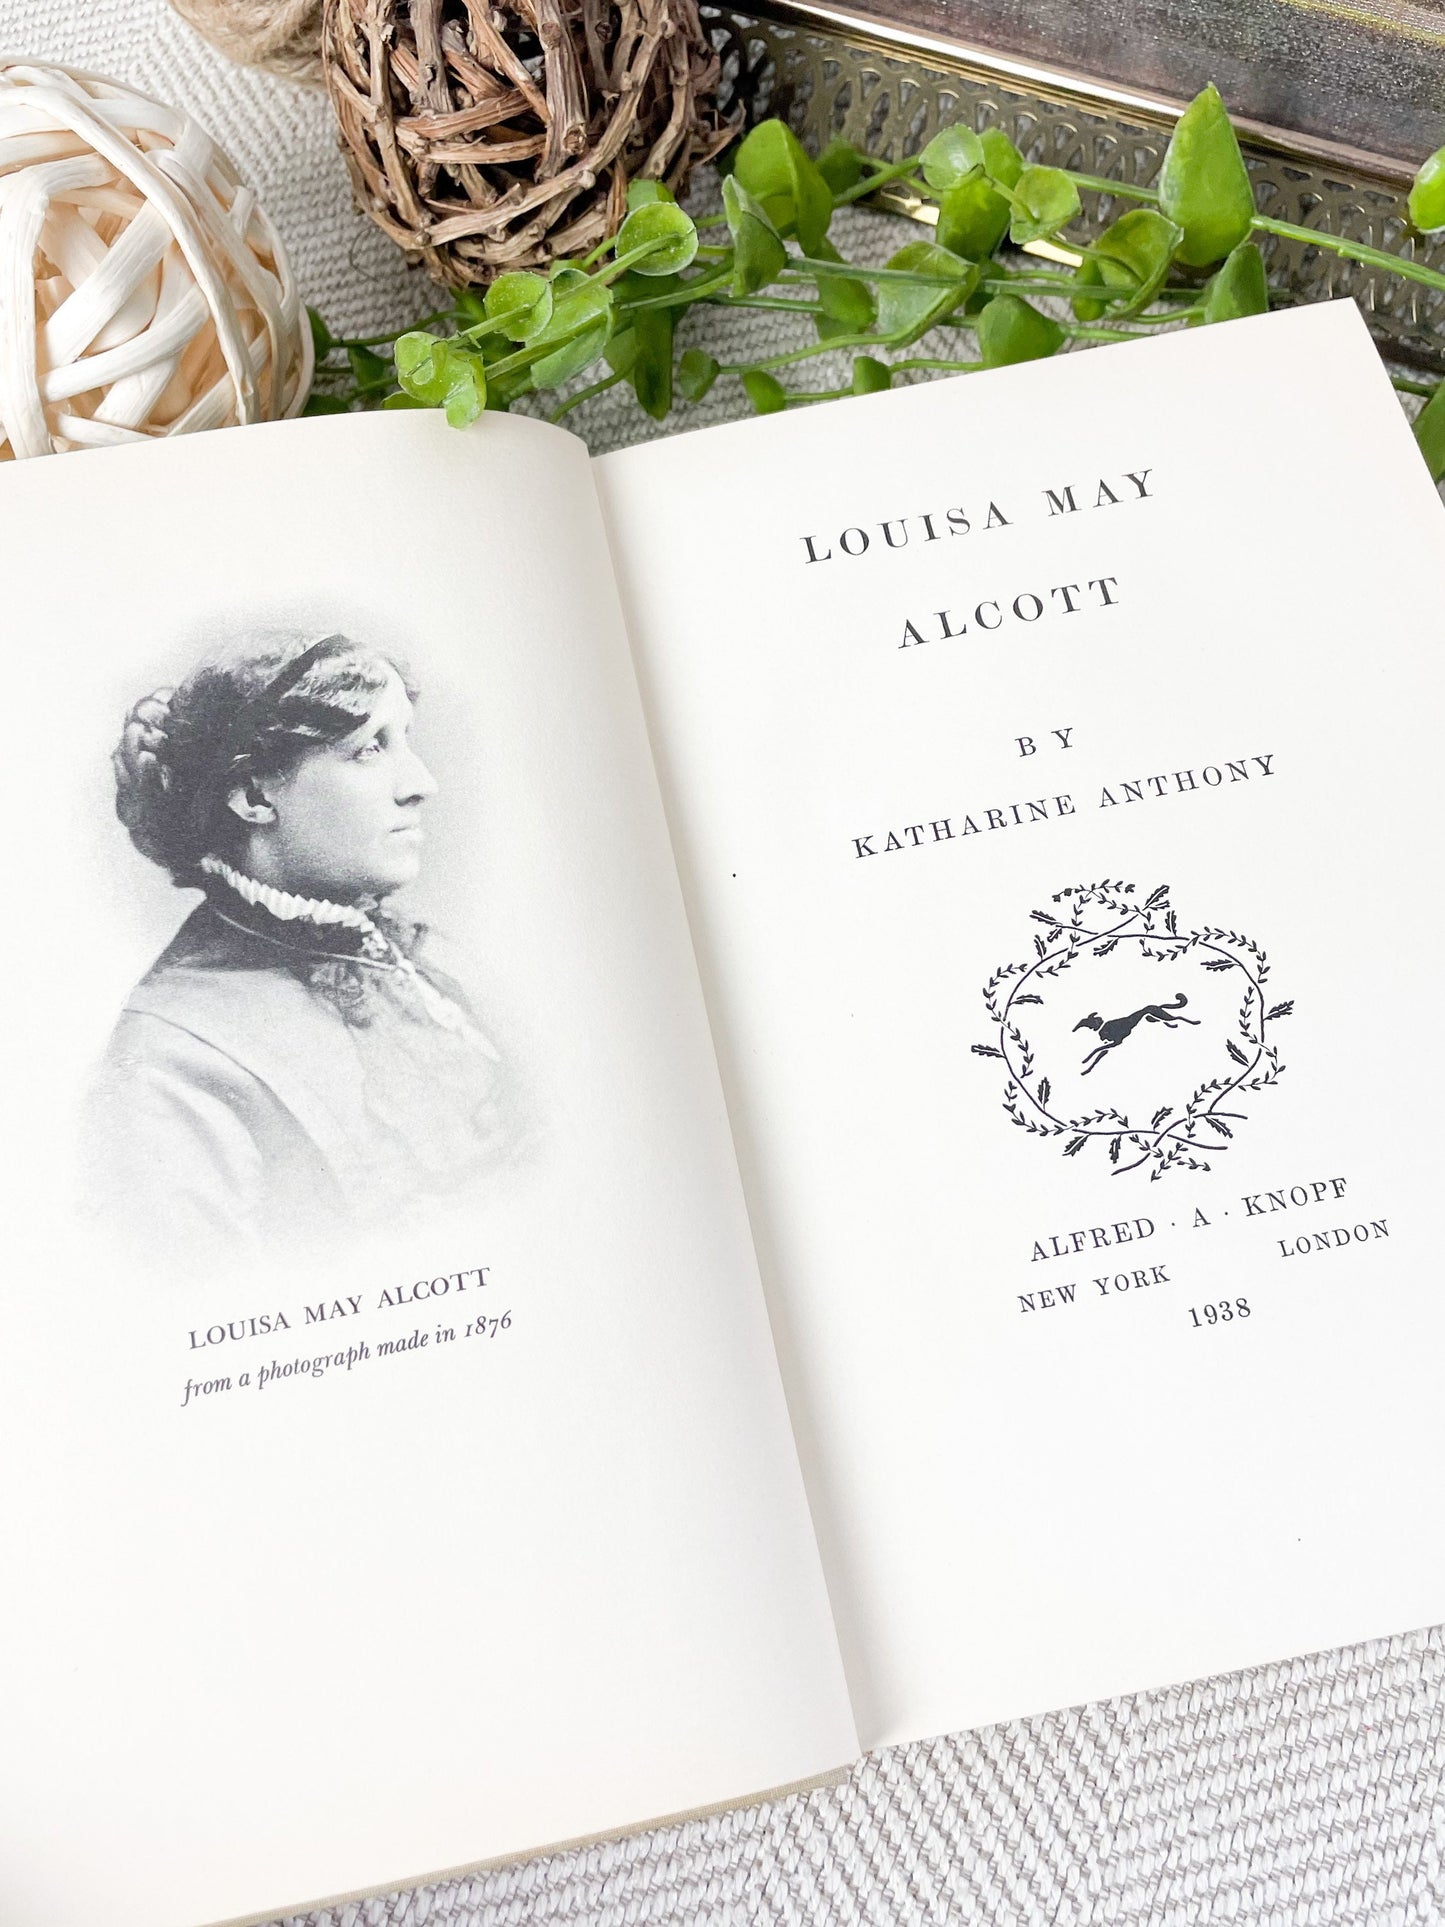 Antique Book, Biography about Louisa May Alcott, Louisa May Alcott by Katharine Anthony